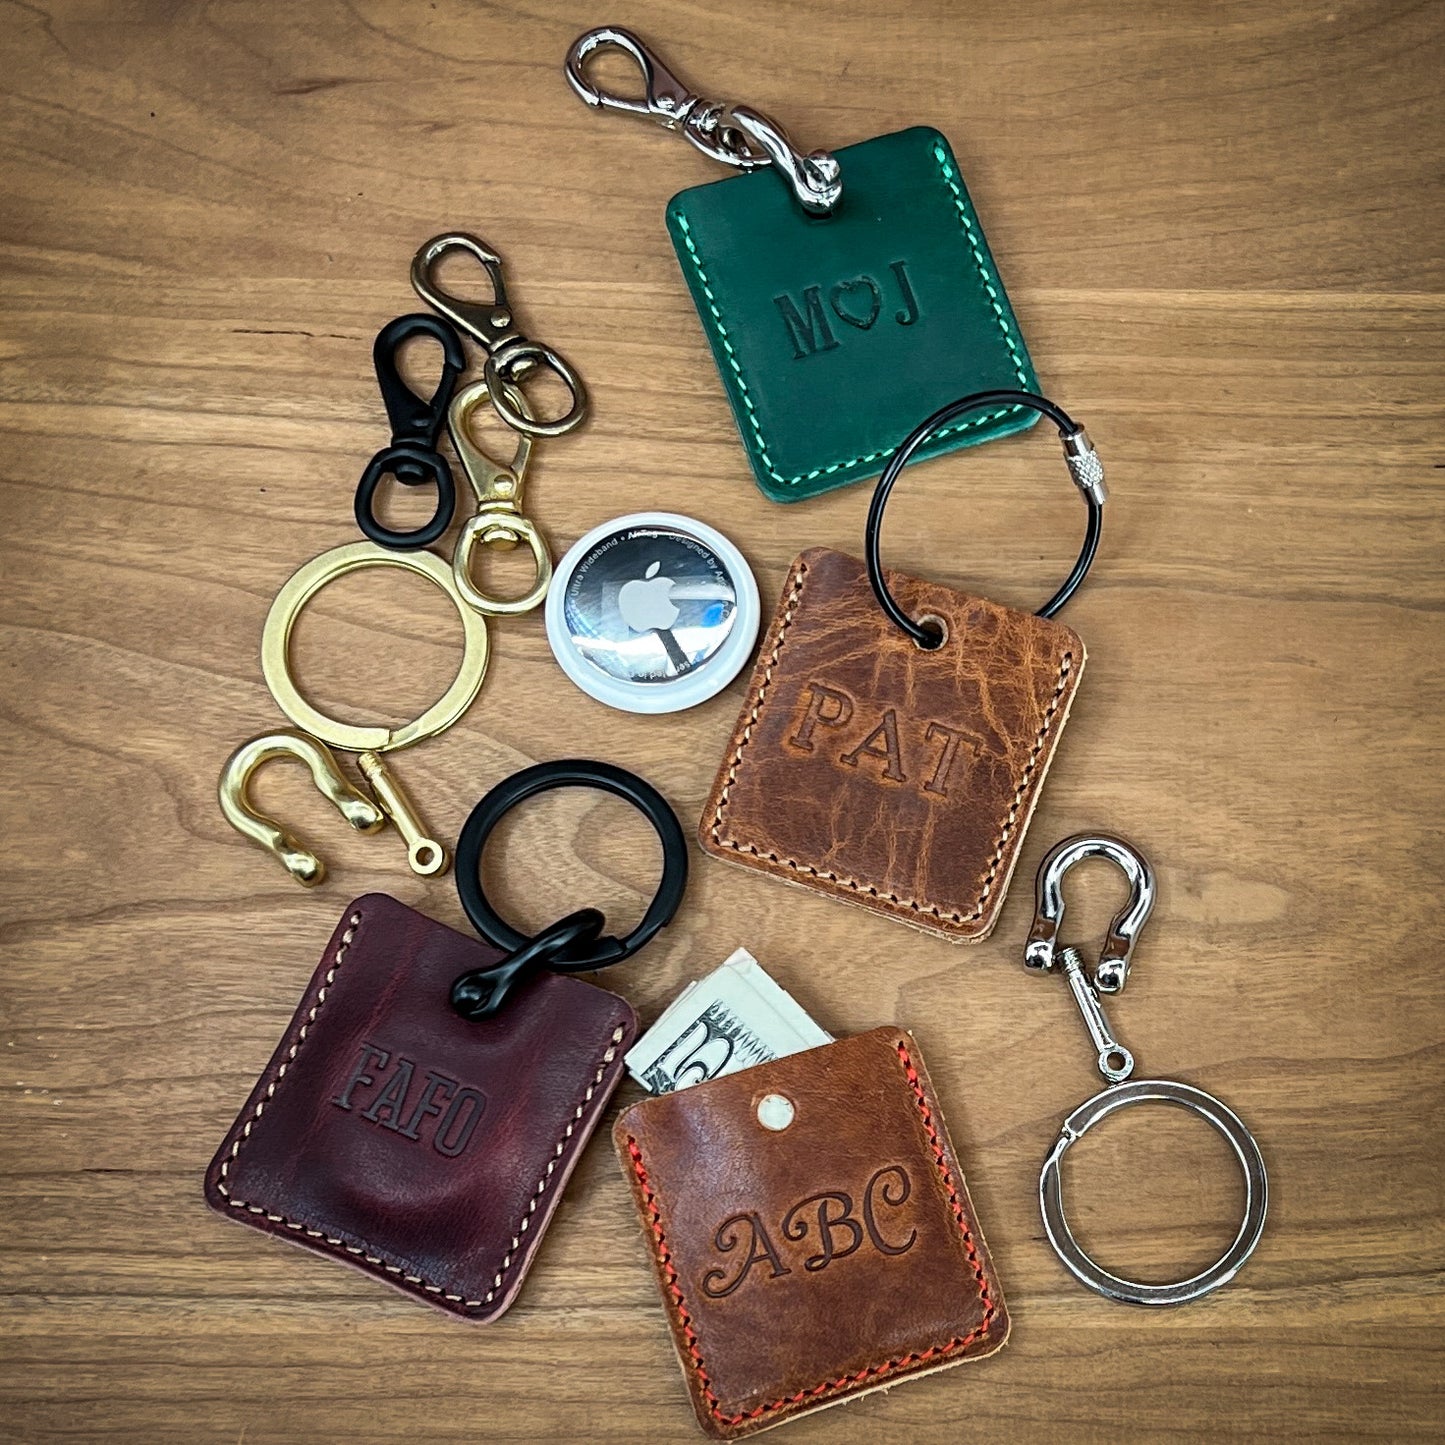 Horween Leather Airtag Keychains and Airtag Luggage Tags